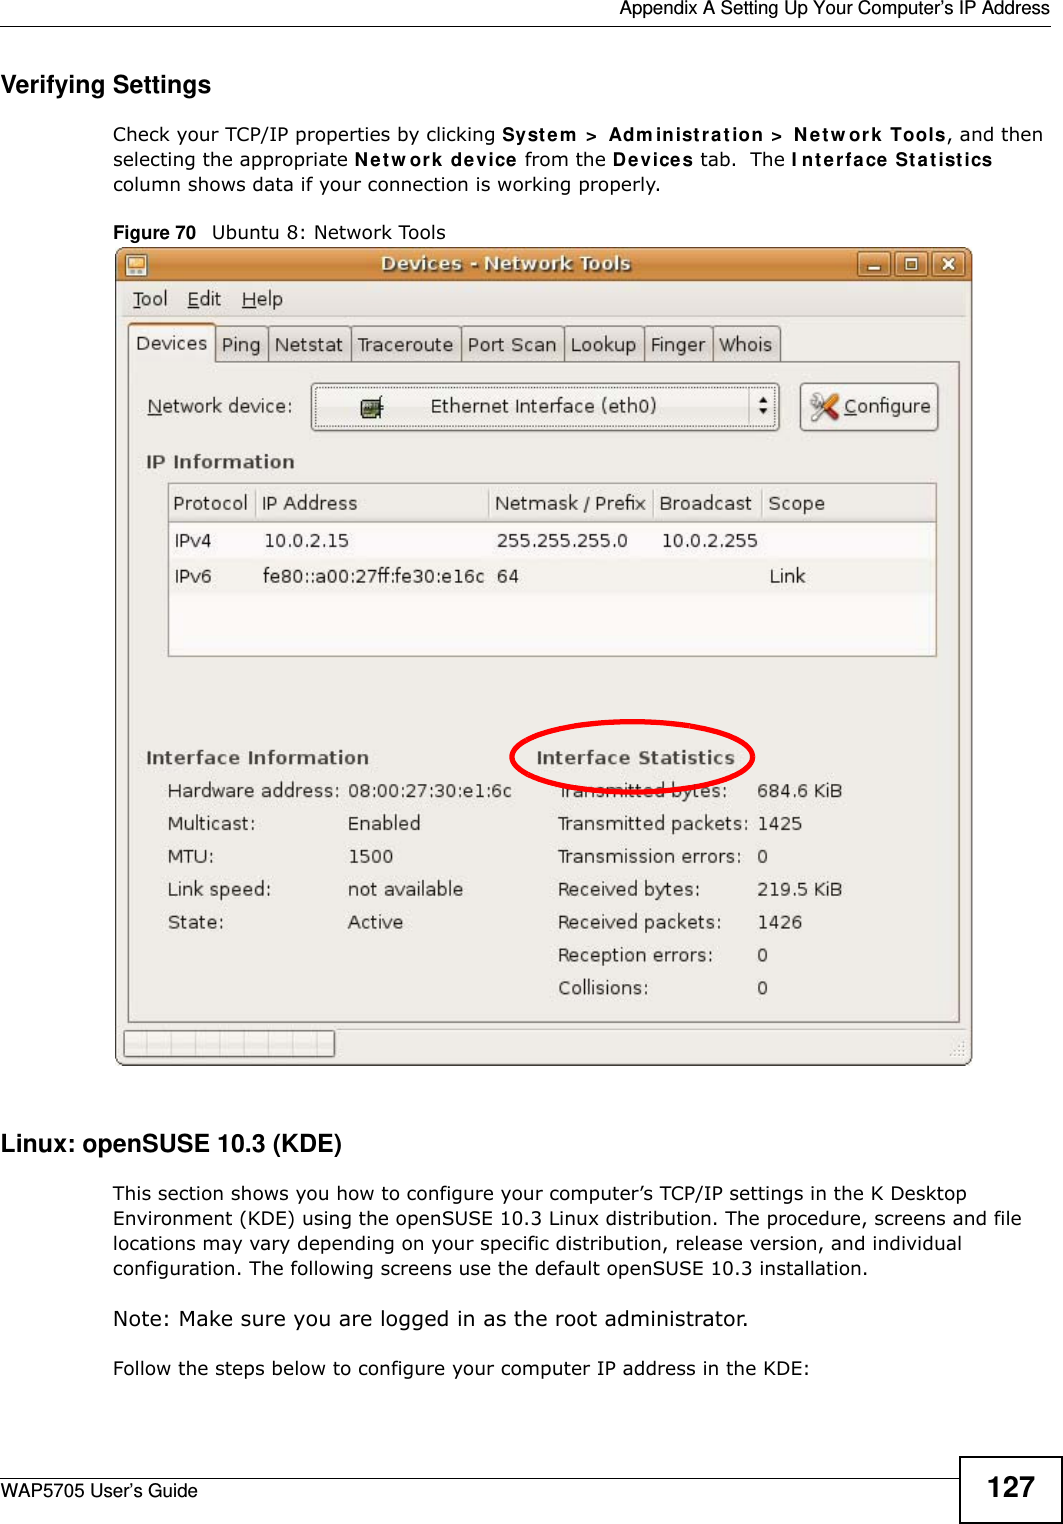  Appendix A Setting Up Your Computer’s IP AddressWAP5705 User’s Guide 127Verifying SettingsCheck your TCP/IP properties by clicking System  &gt;  Adm in ist r a t ion  &gt;  Netw or k  Tools, and then selecting the appropriate N e t w ork de vice from the Devices tab.  The I nt e r fa ce St a t istics column shows data if your connection is working properly.Figure 70   Ubuntu 8: Network ToolsLinux: openSUSE 10.3 (KDE)This section shows you how to configure your computer’s TCP/IP settings in the K Desktop Environment (KDE) using the openSUSE 10.3 Linux distribution. The procedure, screens and file locations may vary depending on your specific distribution, release version, and individual configuration. The following screens use the default openSUSE 10.3 installation.Note: Make sure you are logged in as the root administrator. Follow the steps below to configure your computer IP address in the KDE: